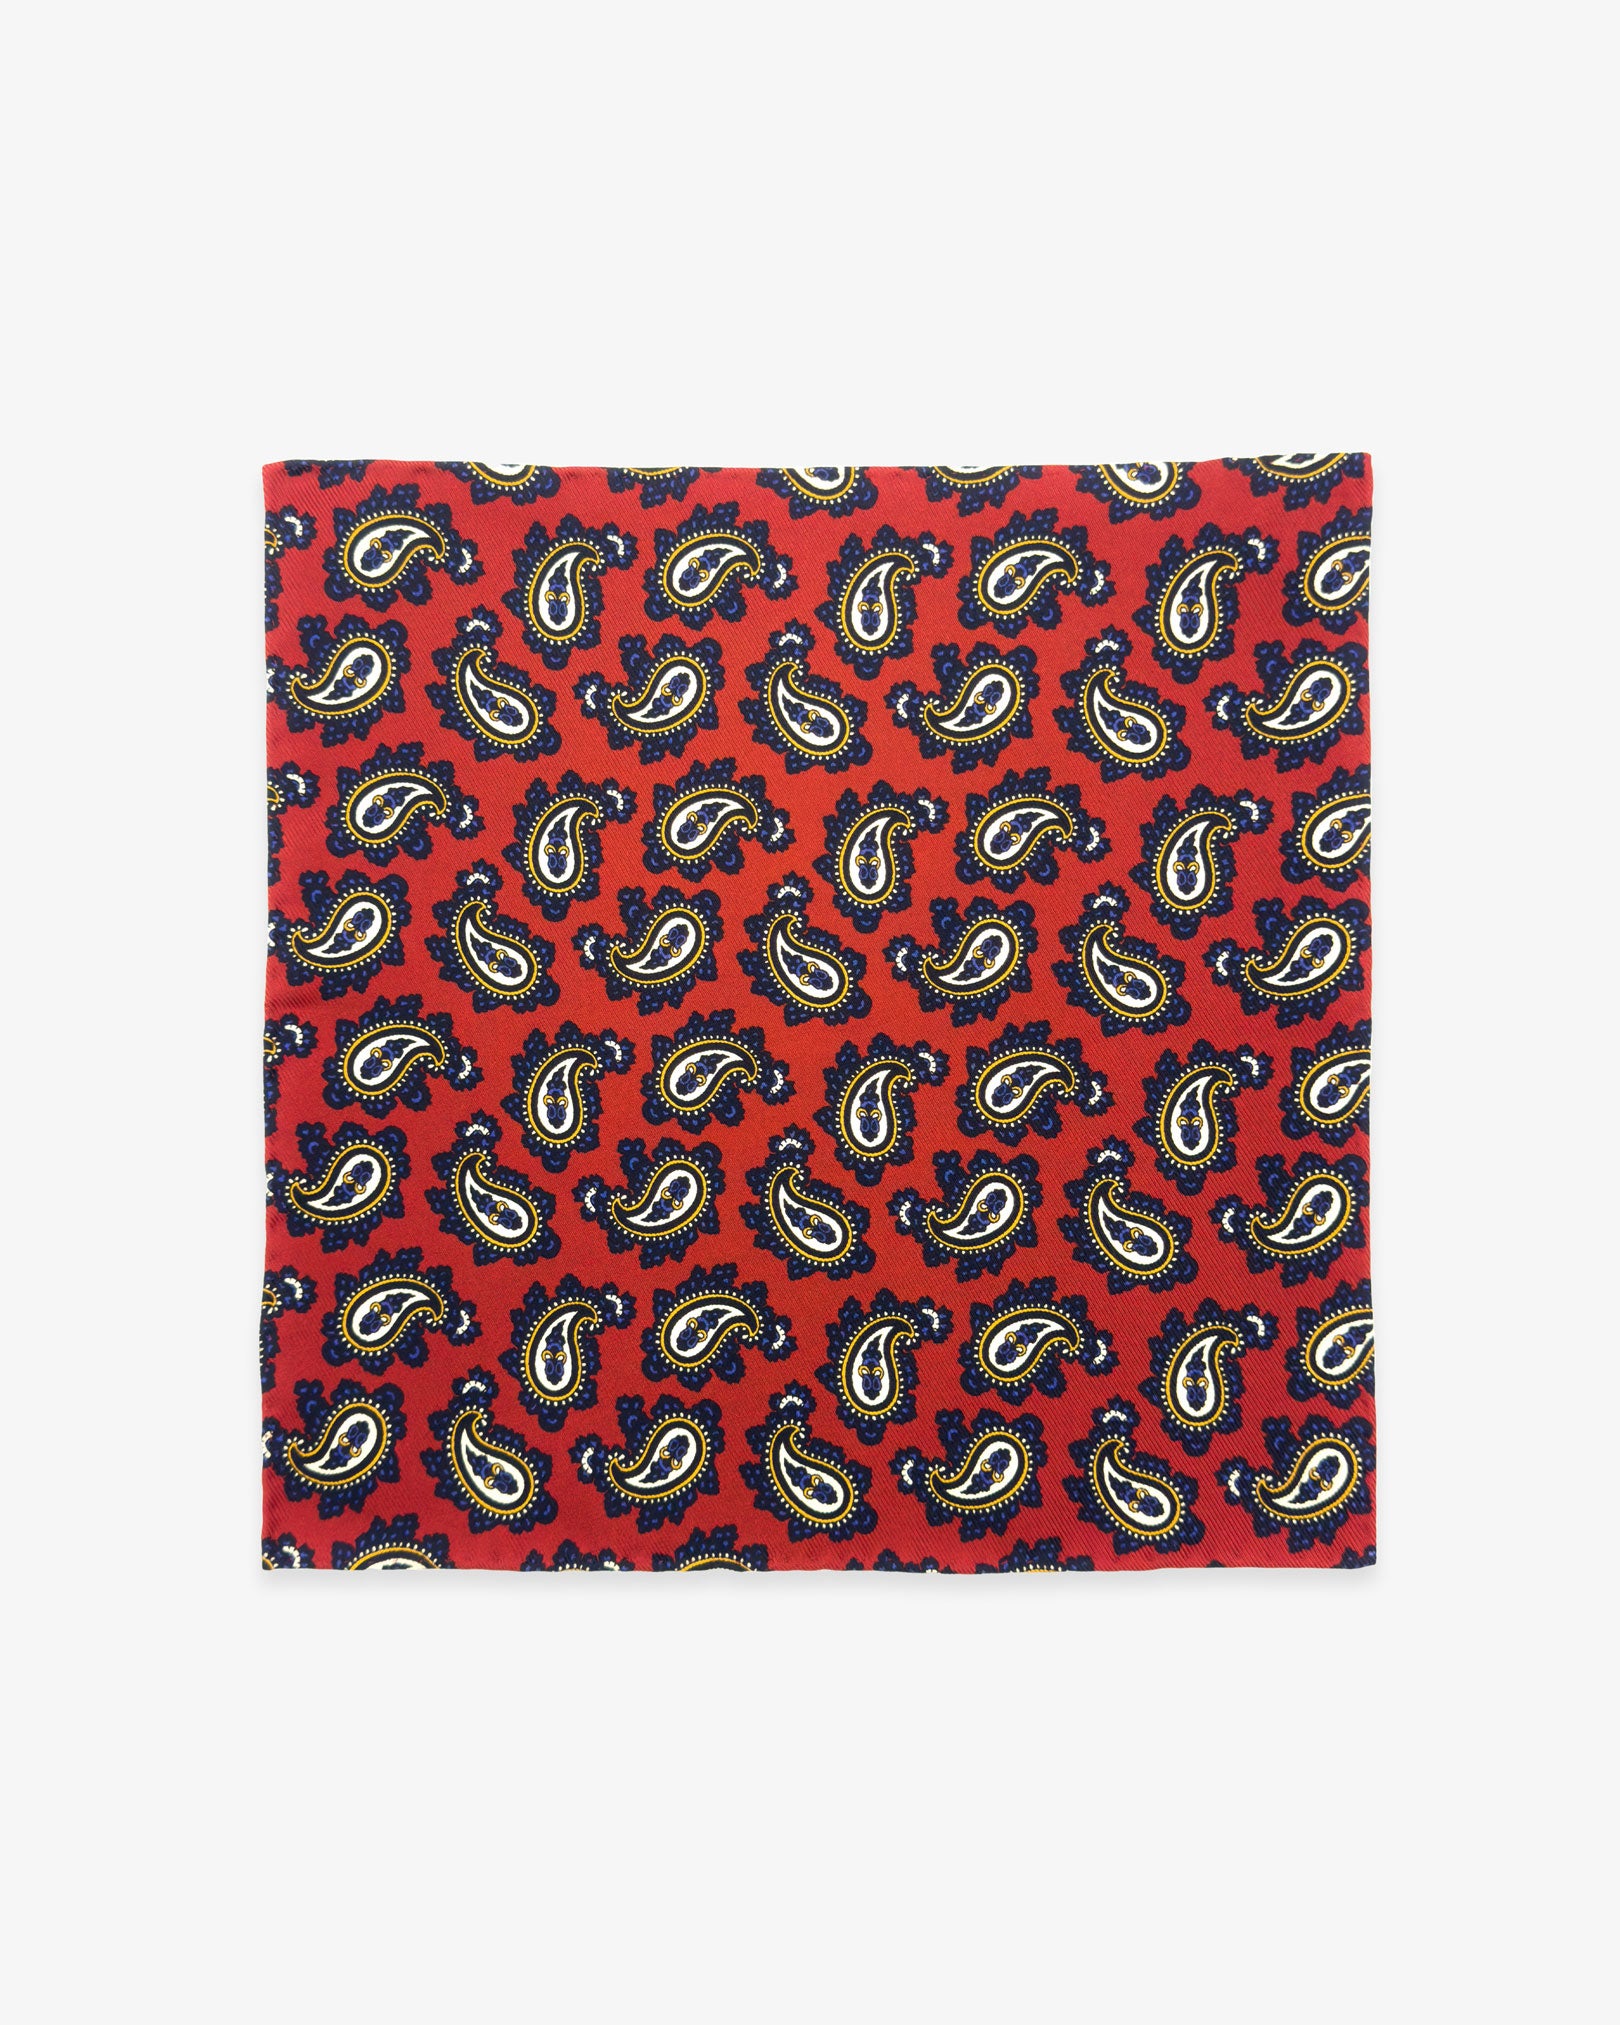 Fully unfolded 'Binham' English silk pocket square, showing the classic paisley patterns of yellow, cream and blue against a red background.